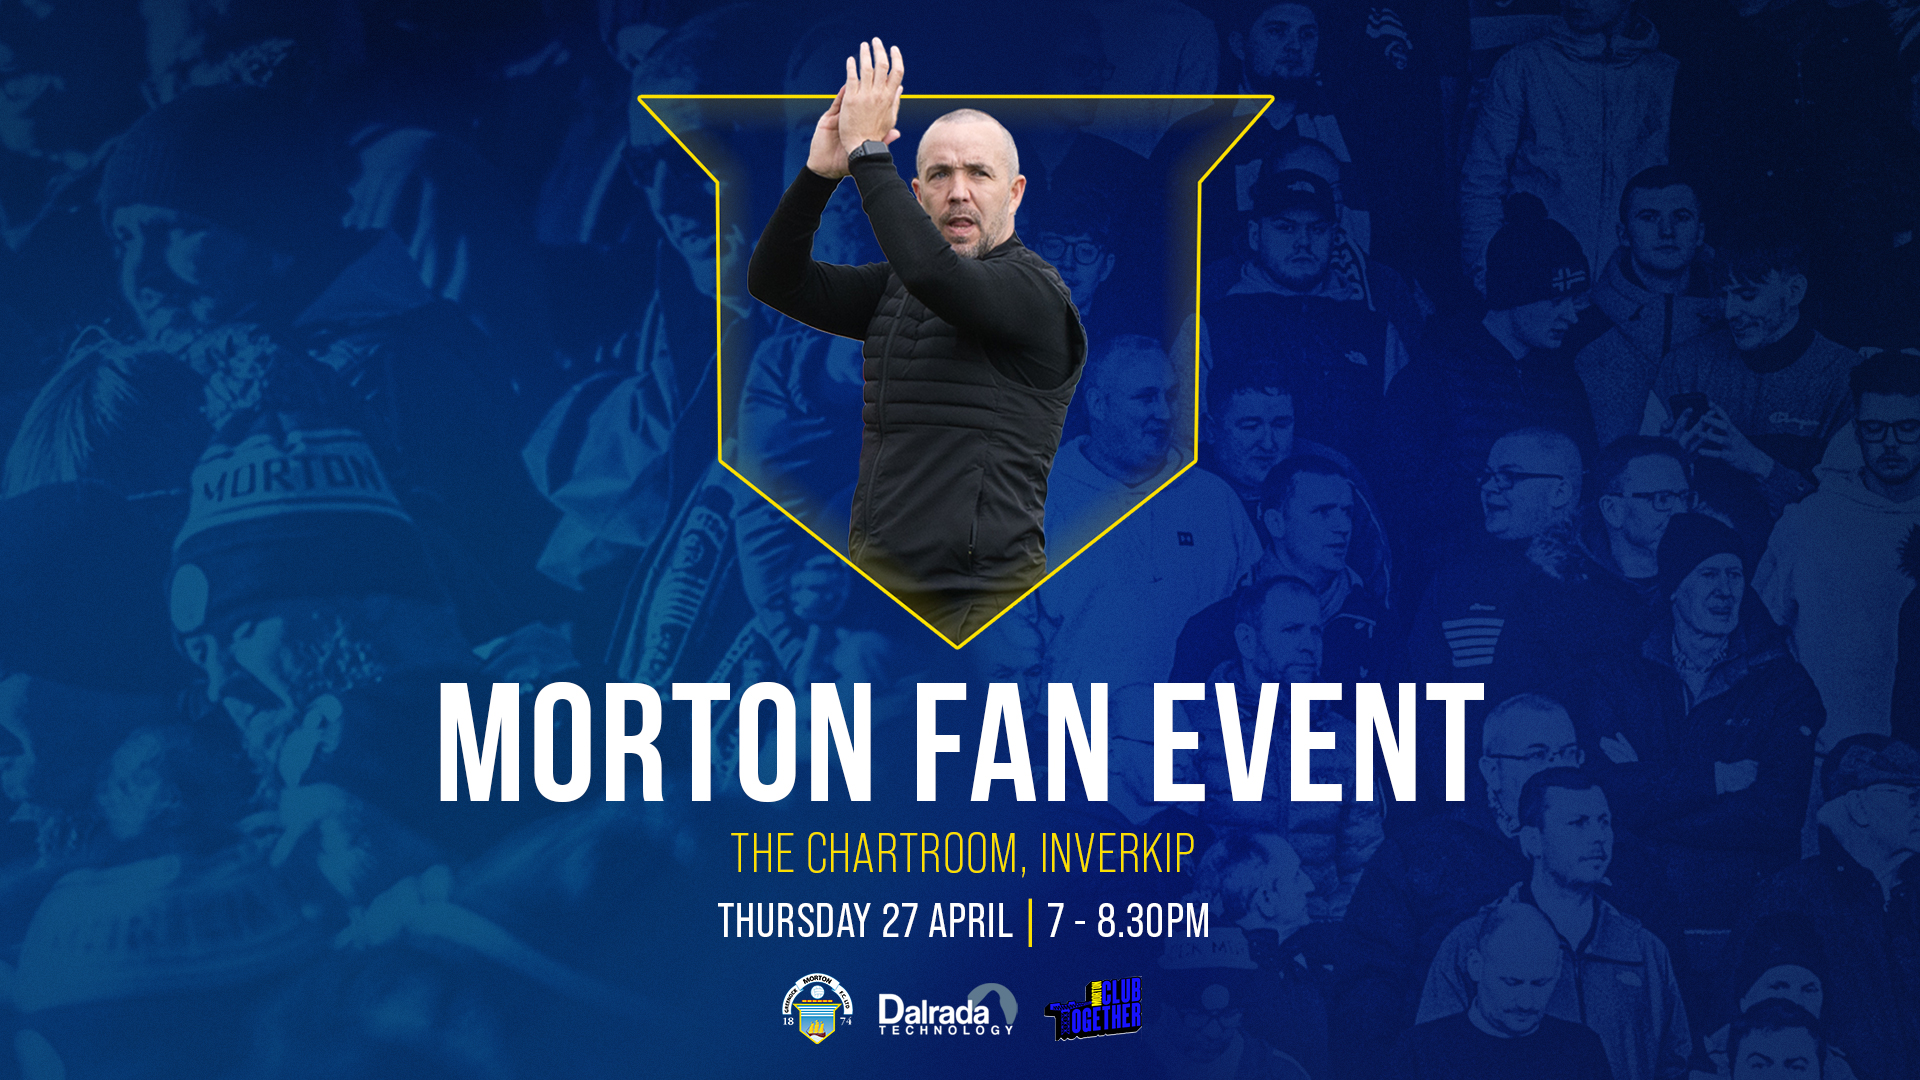 Morton to host meet the staff event at Chartoom in Inverkip